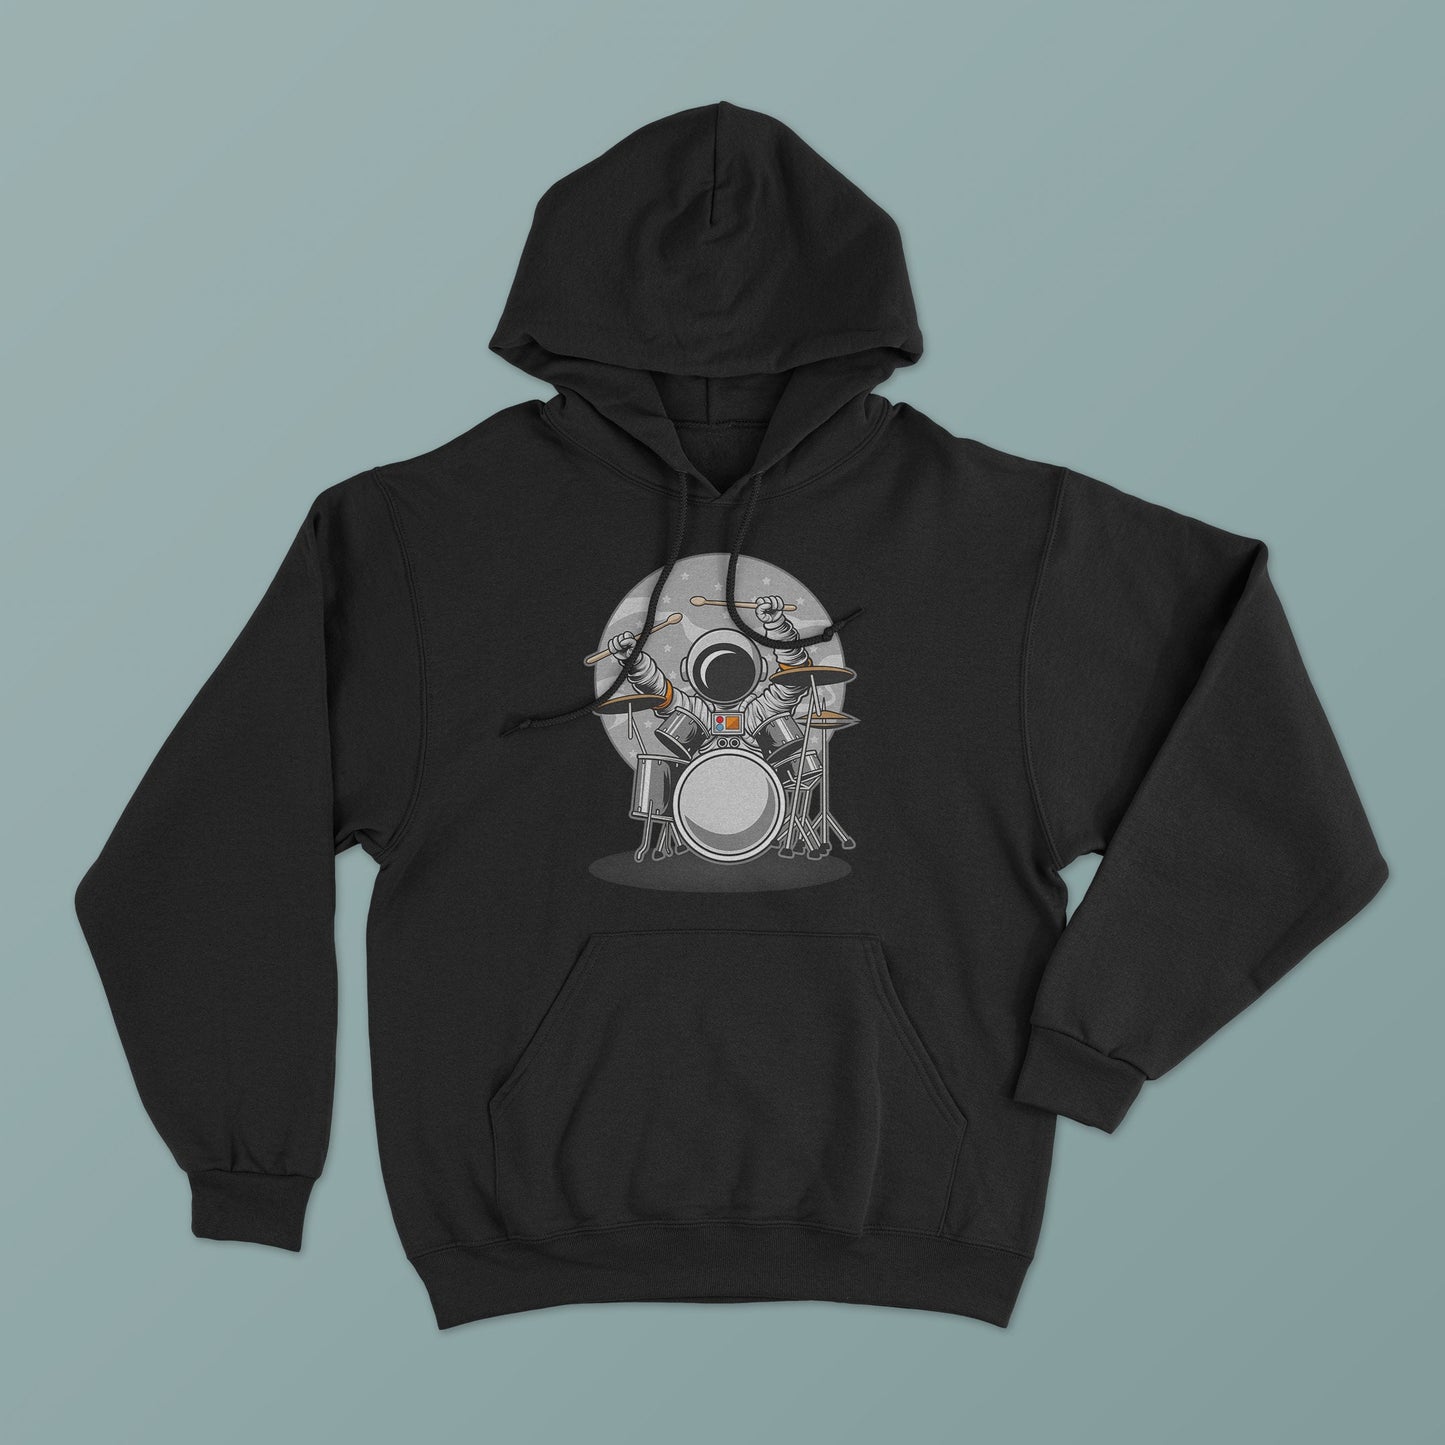 Astronaut Drummer in Space Hoodie - Cosmic Grooves and Unique Style Tee! Men's, Women's Unisex Hooded Sweatshirt, Space and Planets